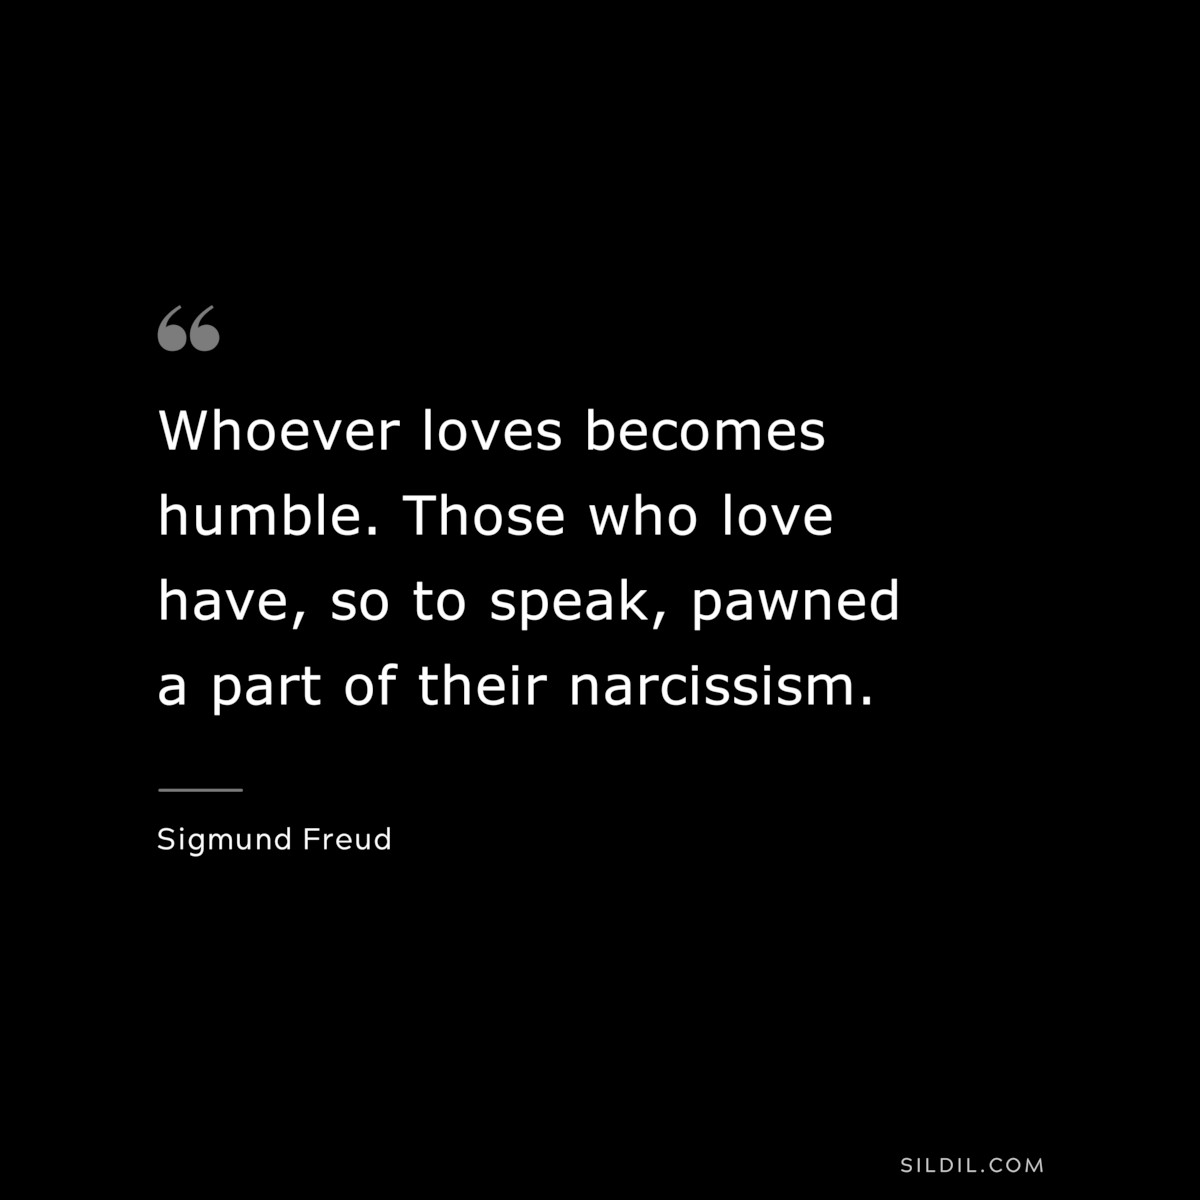 Whoever loves becomes humble. Those who love have, so to speak, pawned a part of their narcissism. ― Sigmund Frued